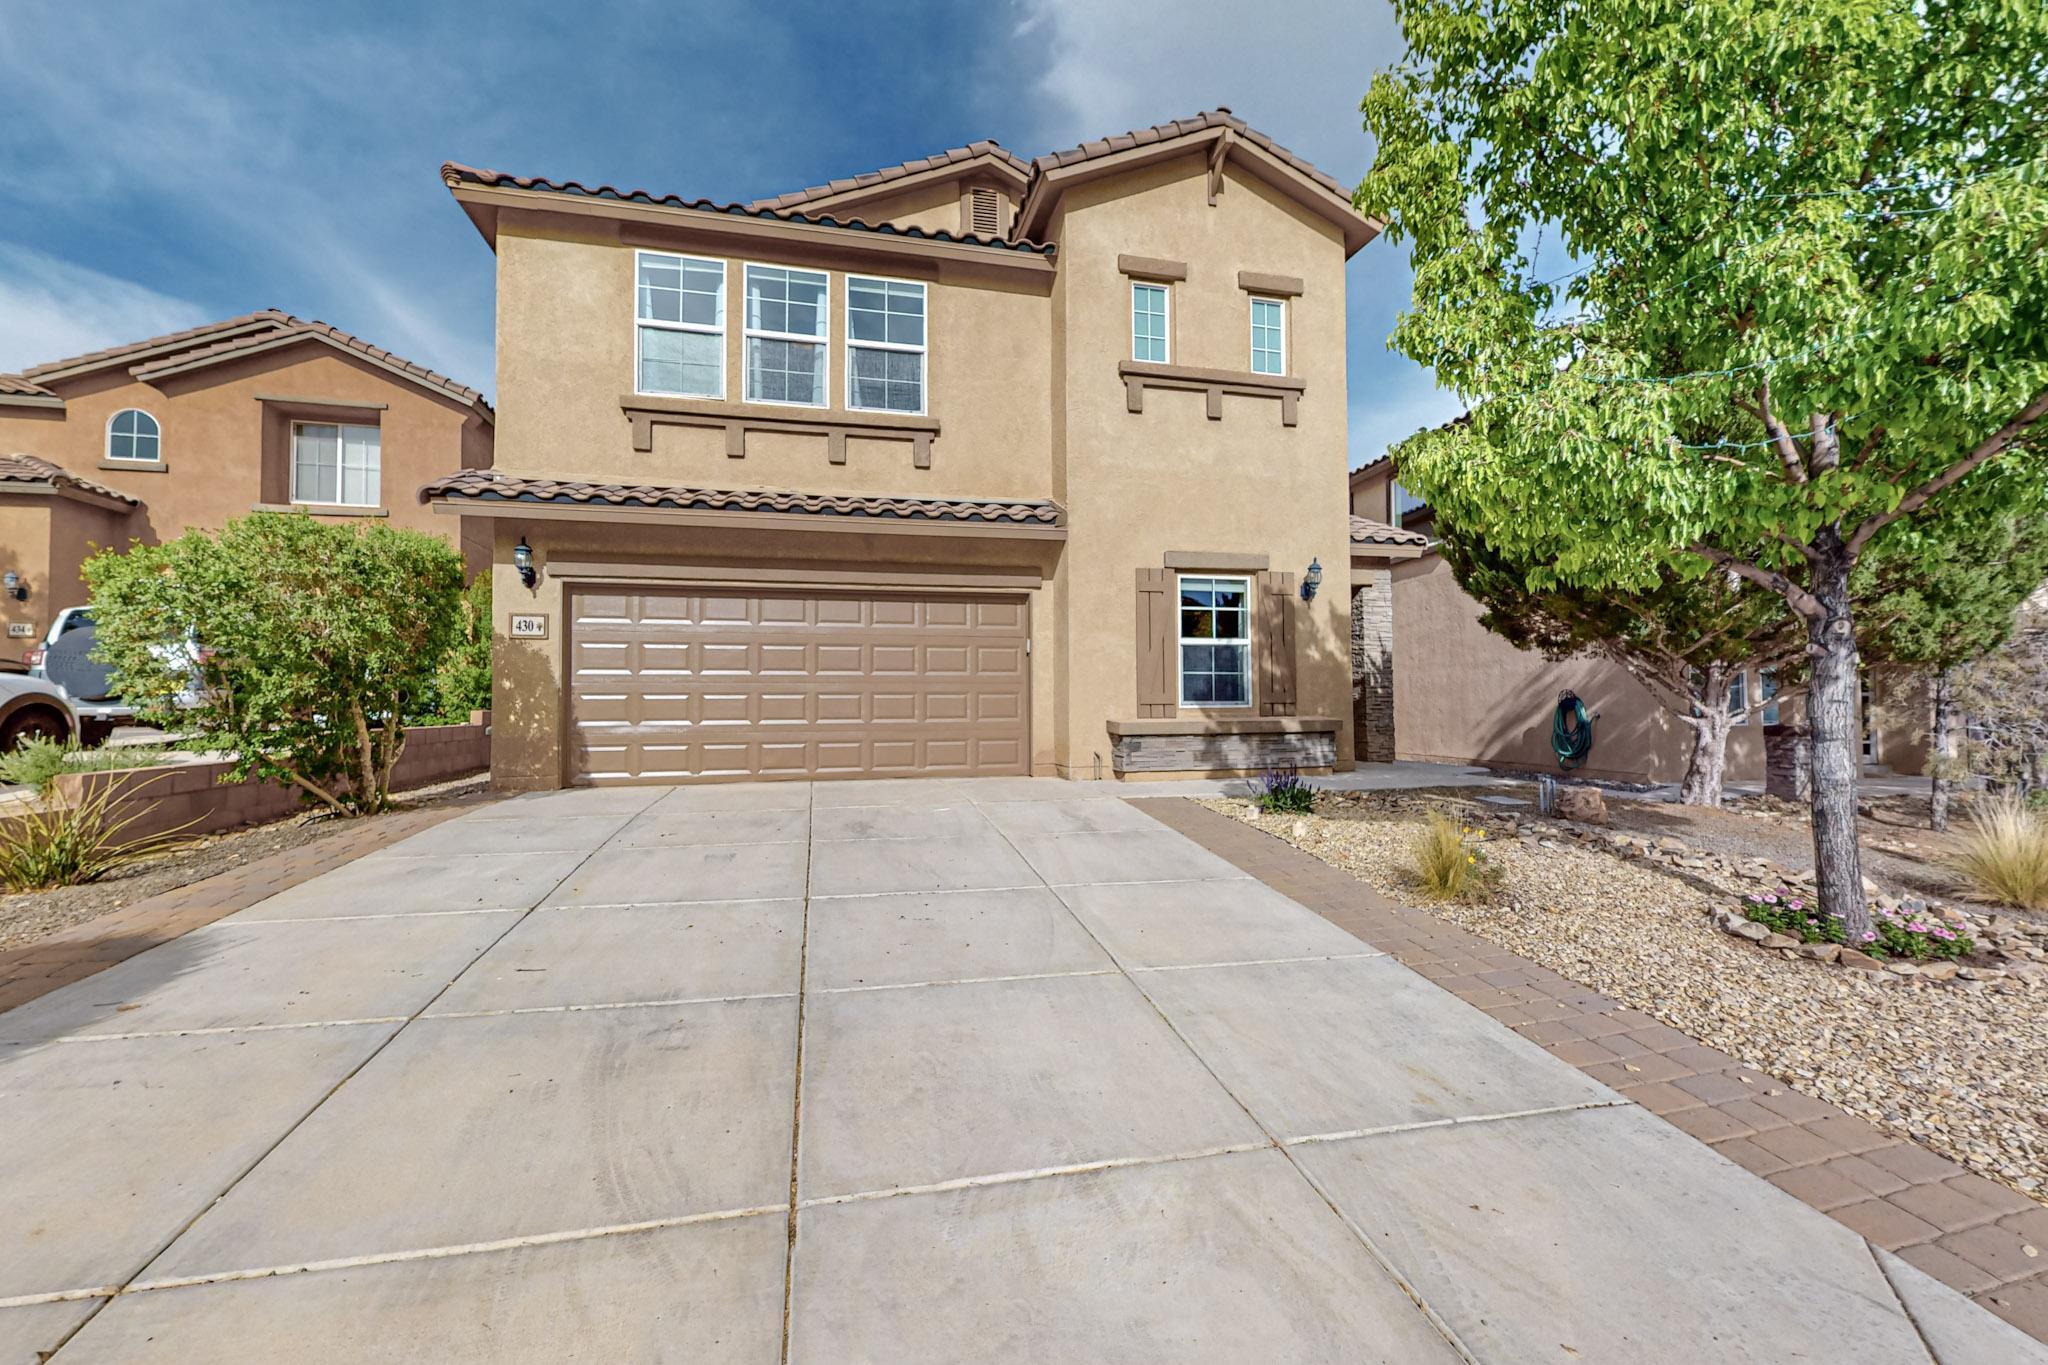 430 Paseo Roja Place NE, Rio Rancho, New Mexico 87124, 4 Bedrooms Bedrooms, ,3 BathroomsBathrooms,Residential,For Sale,430 Paseo Roja Place NE,1061482